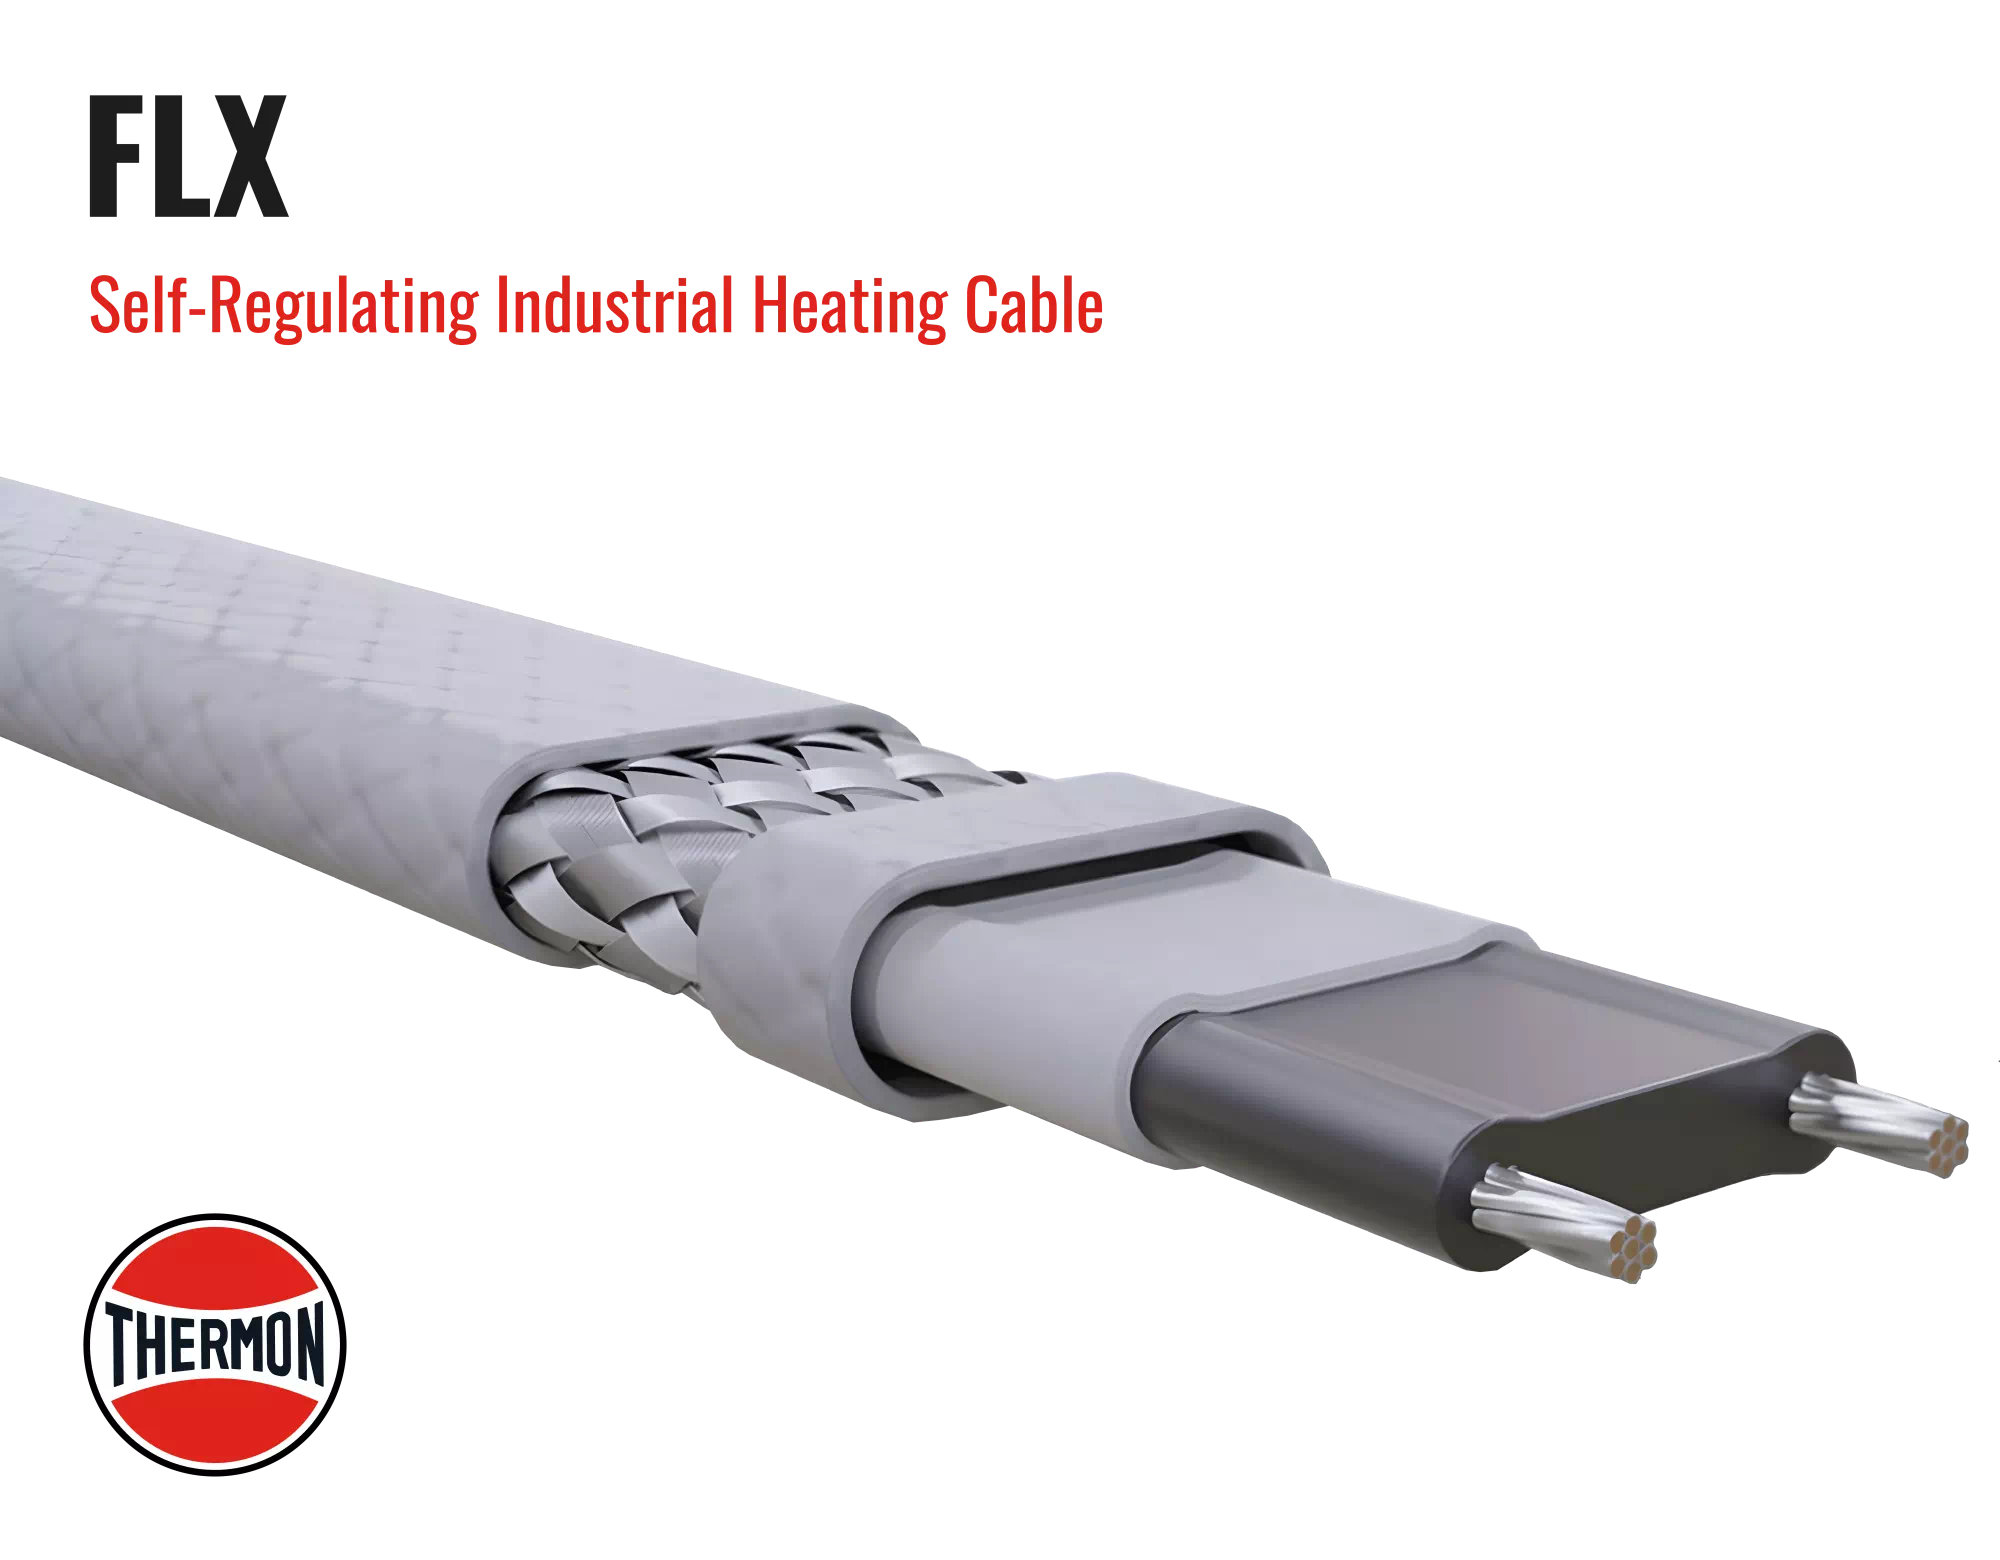 Thermon FLX-Self-Regulating-Heating-Cable